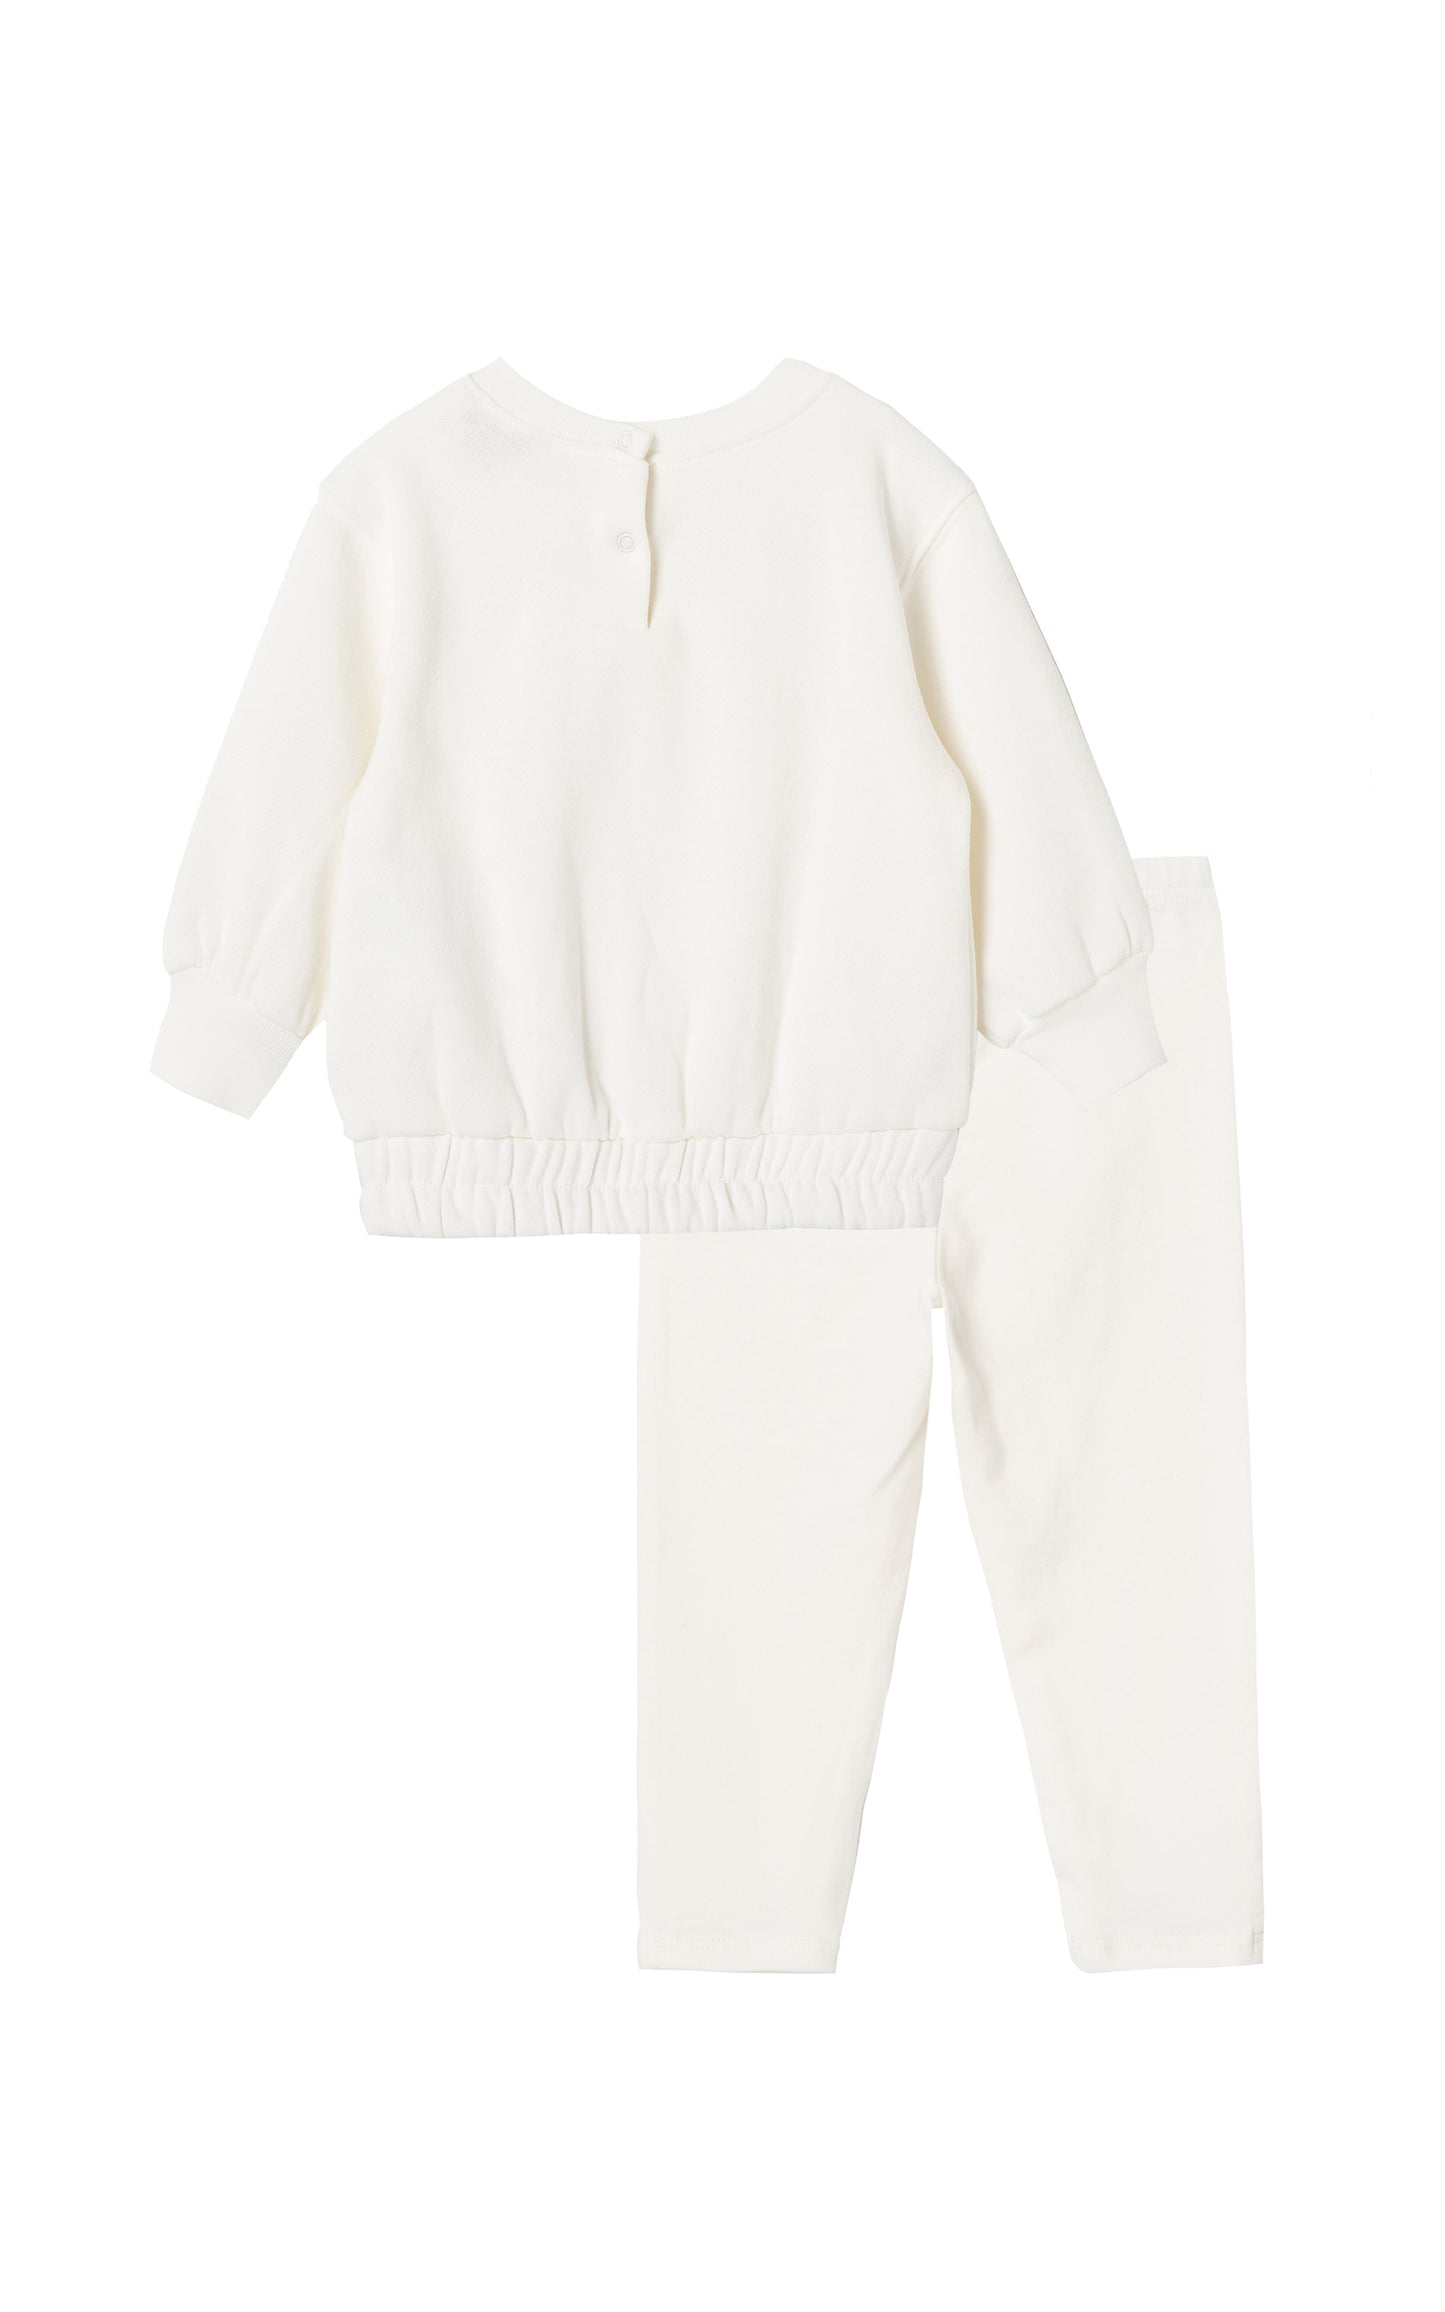 Back view of off-white fleece sweatshirt set with a bow 